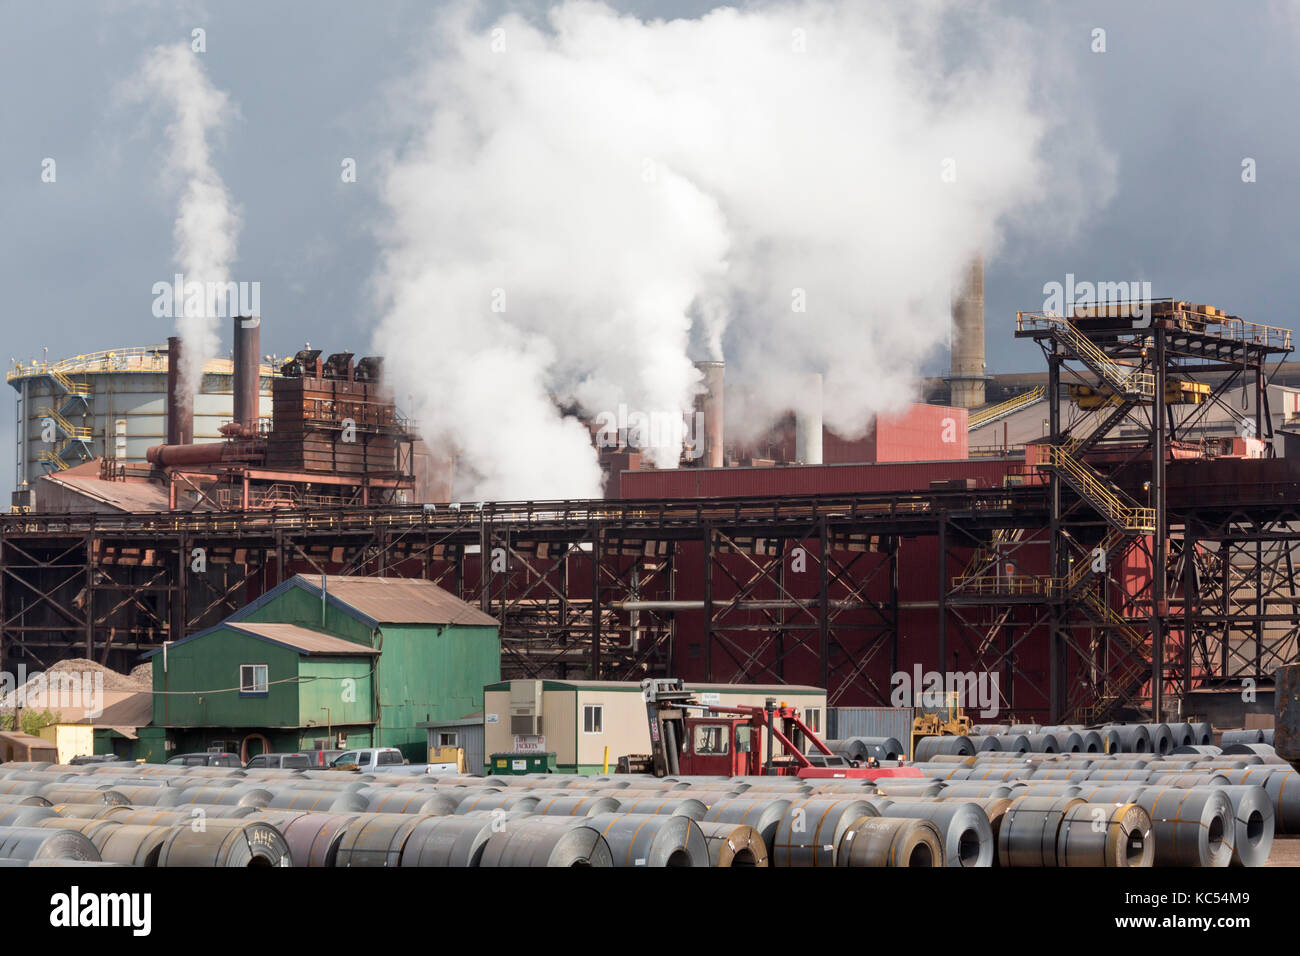 Sault Ste. Marie, Ontario Canada - Steel rolls at the Algoma steel mill on the shore of the St. Mary's River. Stock Photo